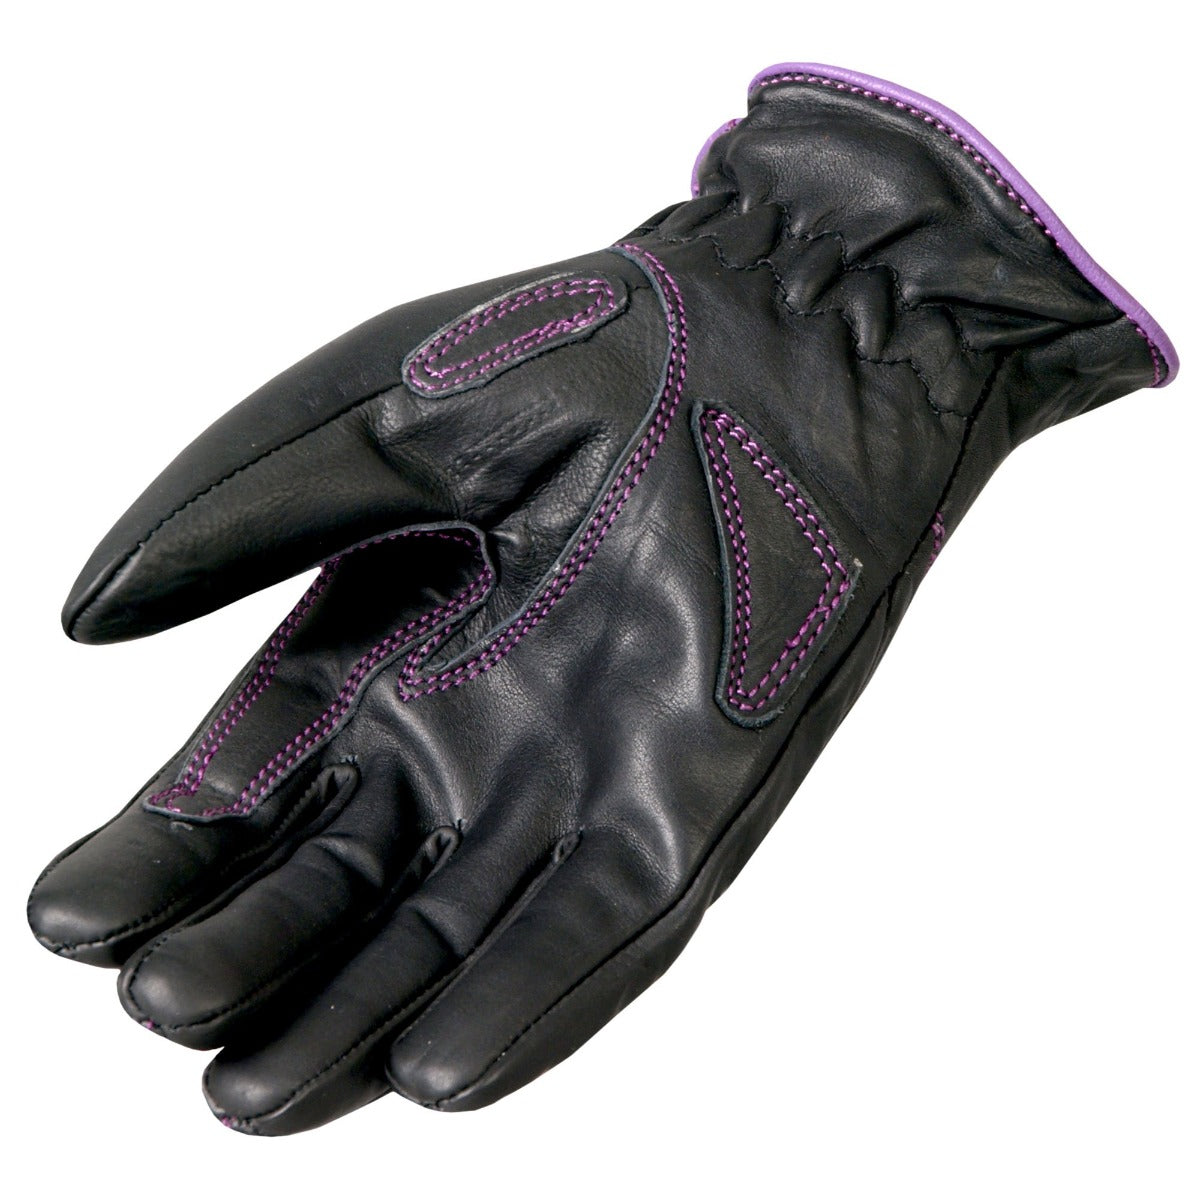 Hot Leathers Women's Driving Gloves W/Purple Piping